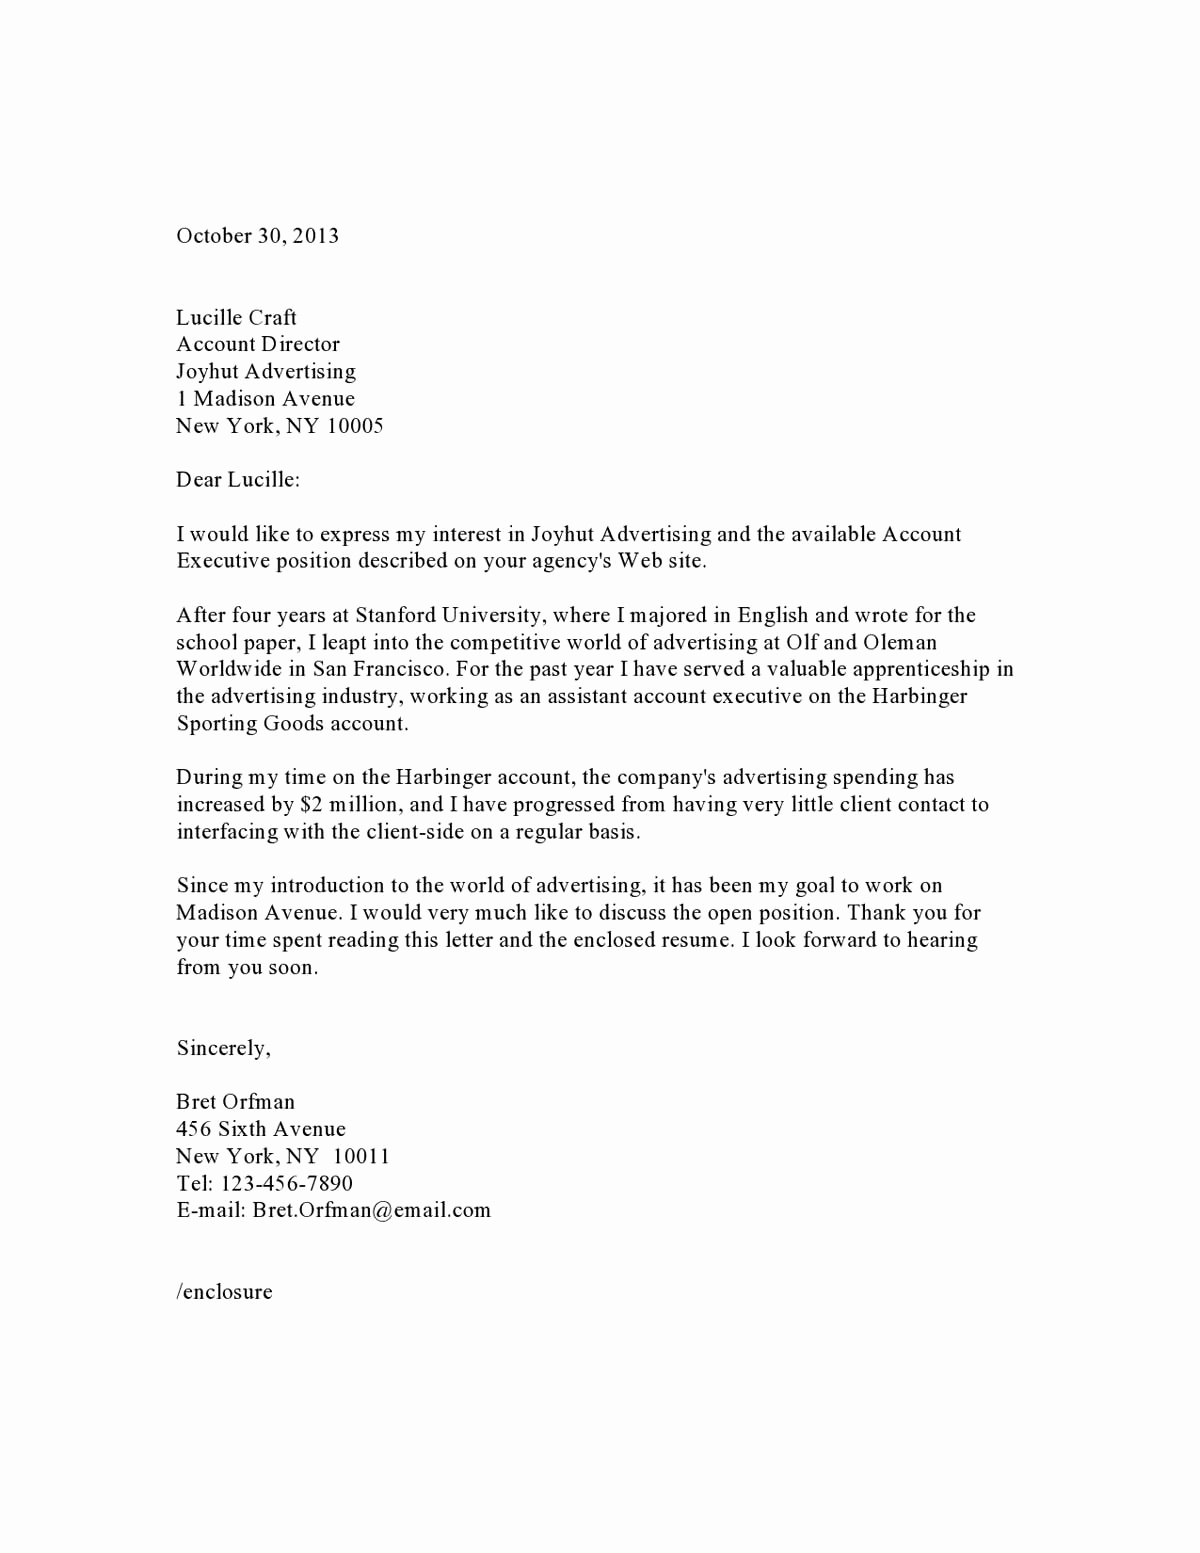 Email Cover Letter Example Beautiful 10 Resume Cover Letter Examples Pdf